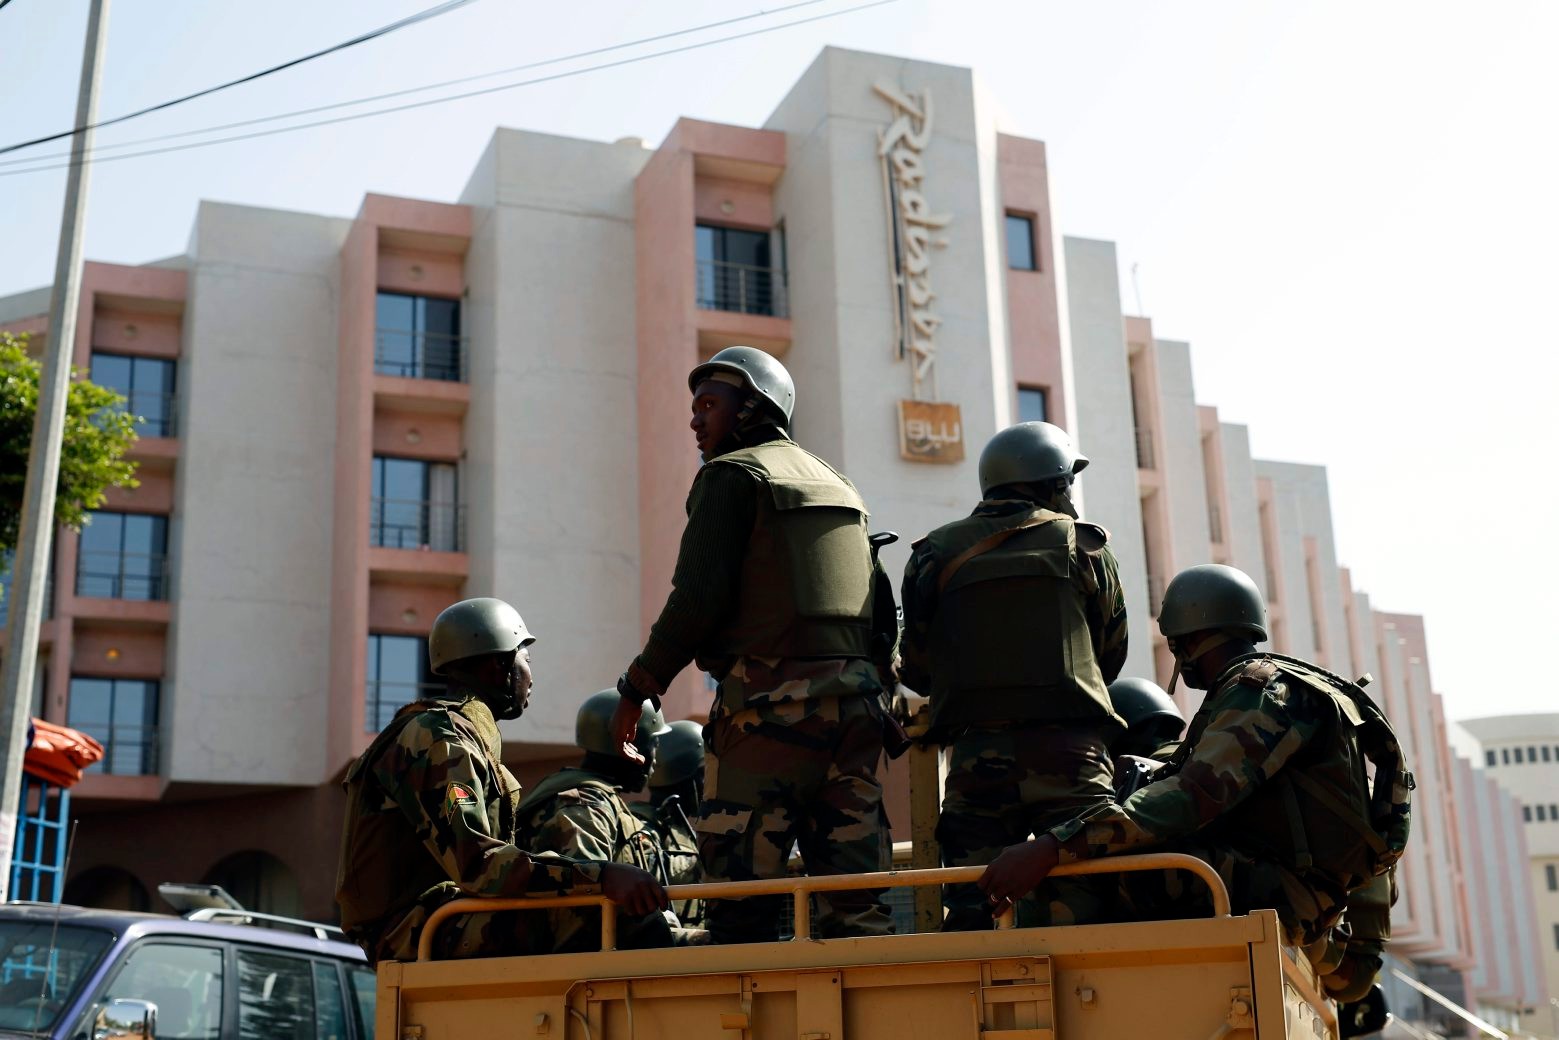 Soldiers from the presidential patrol outside the Radisson Blu hotel in Bamako, Mali, Saturday, Nov. 21, 2015, in anticipation of the President's visit. Malian security forces were hunting "more than three" suspects after a brazen assault on a luxury hotel in the capital that killed 20 people plus two assailants, an army commander said Saturday. (AP Photo/Jerome Delay) APTOPIX Mali Hotel Attack